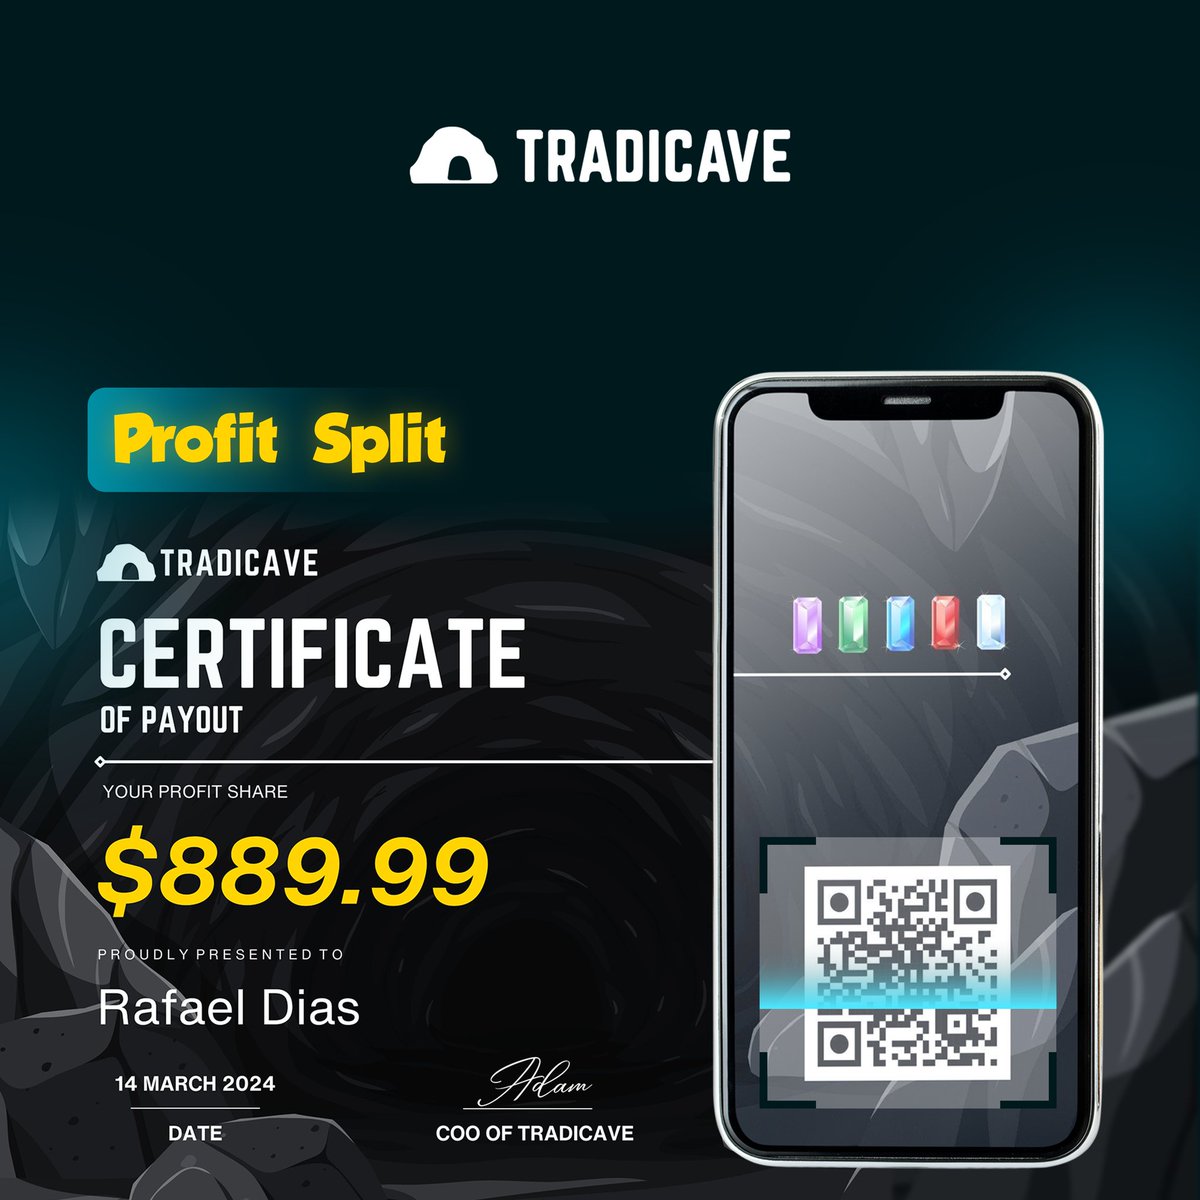 Cheers to remarkable achievements ✨ Big shoutout to our Traders for hitting their payouts milestones with Tradicave's funded accounts. Dedication truly yields reward✅ Follow @Tradicave For more visit: tradicave.com #tradicave #propfirm #proptrading #propfirmtrader